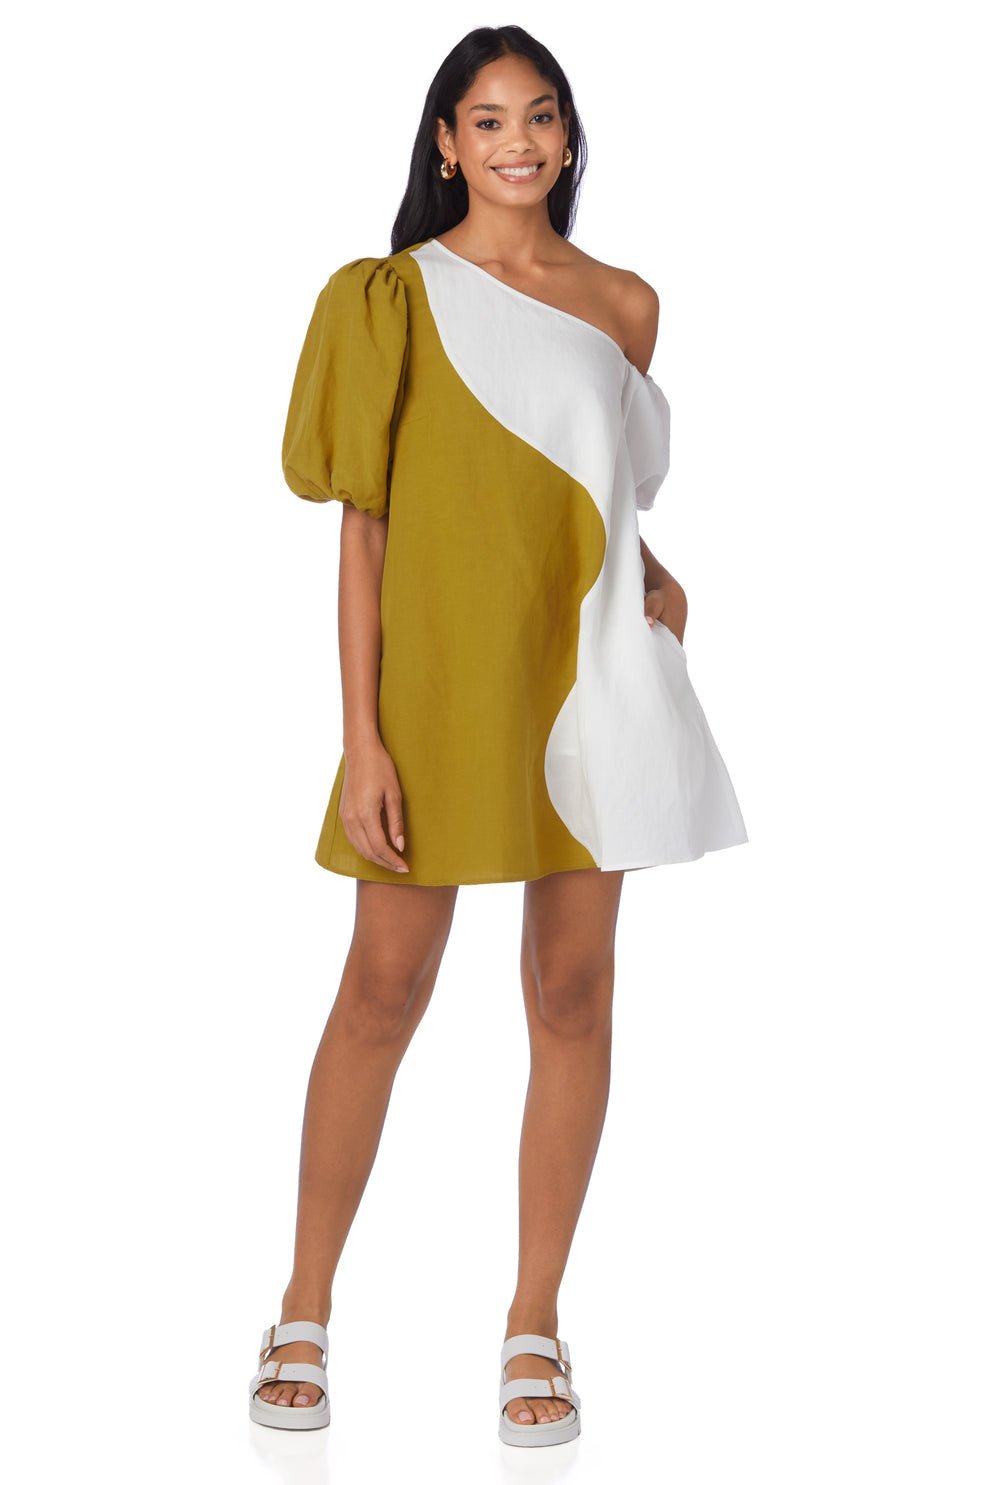 Crosby - Raleigh Dress: Golden Hour Colorblock - Shorely Chic Boutique